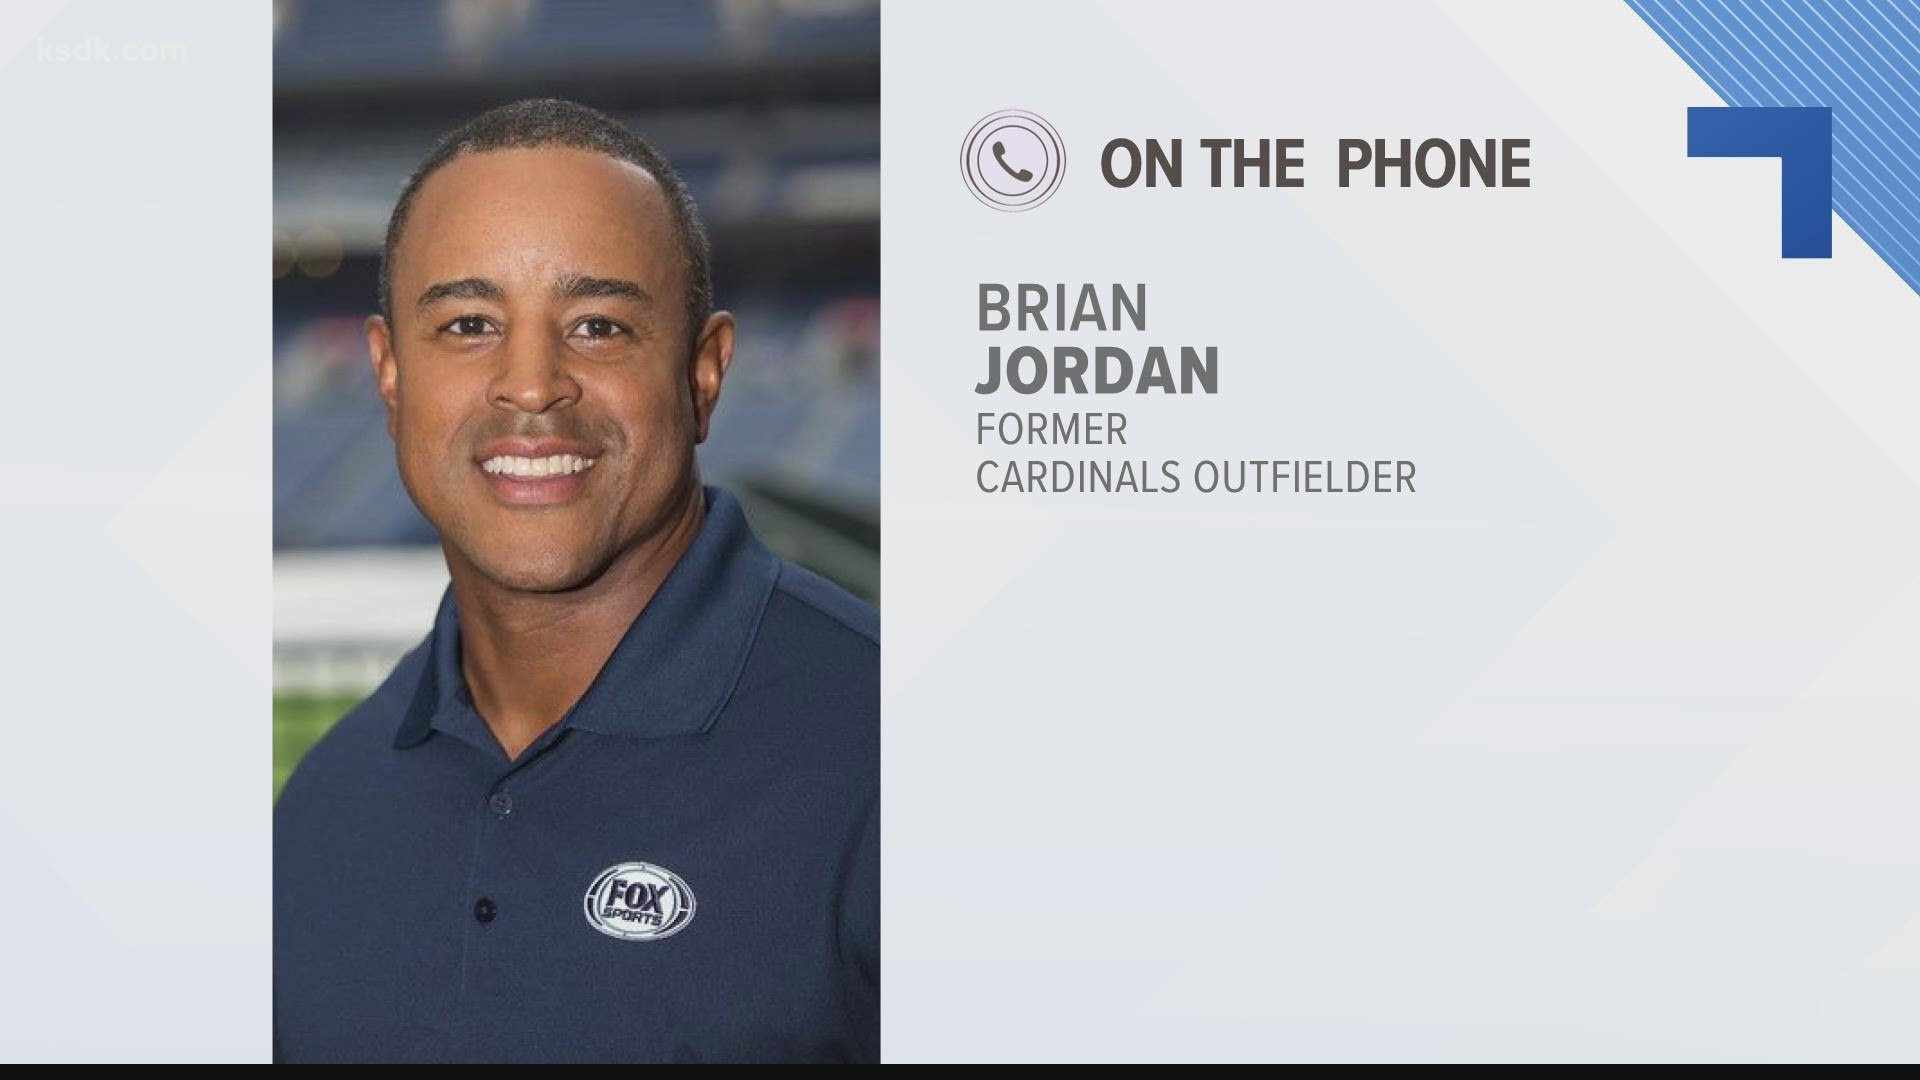 Who is the baseball player brian jordan married to?